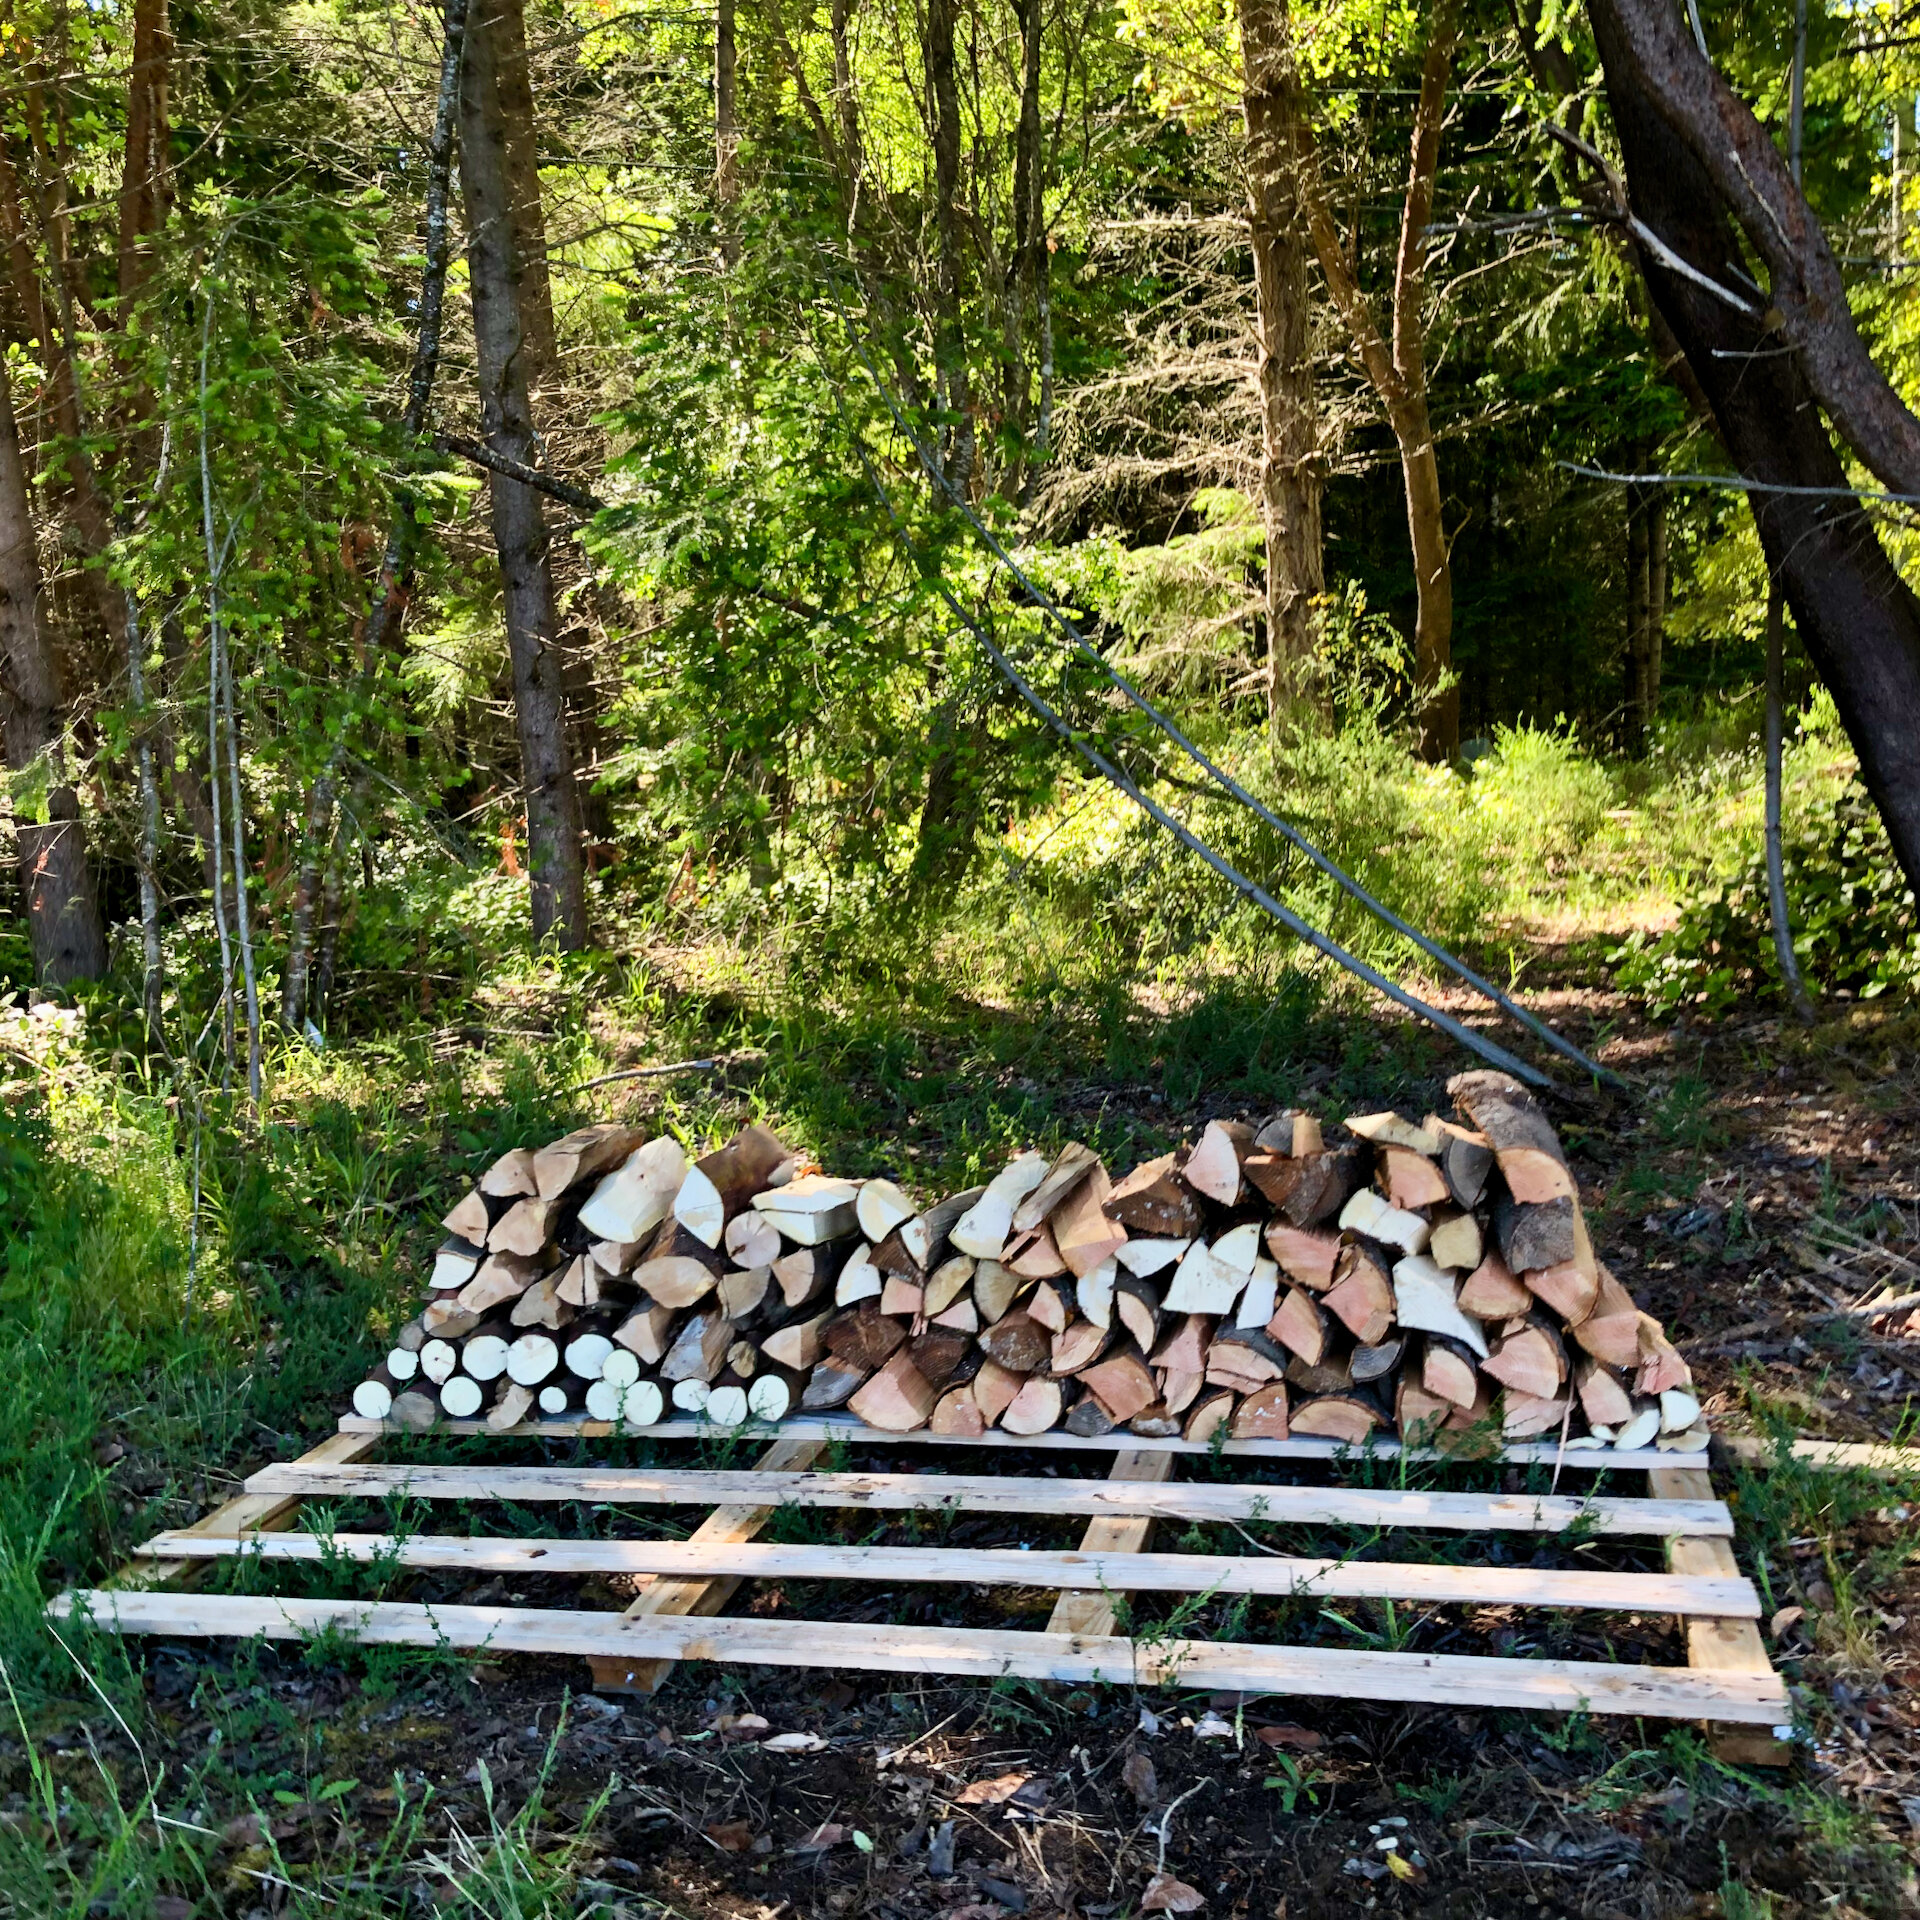  From one of our wood deliveries, we had a big palate that was perfect for stacking the wood on. 